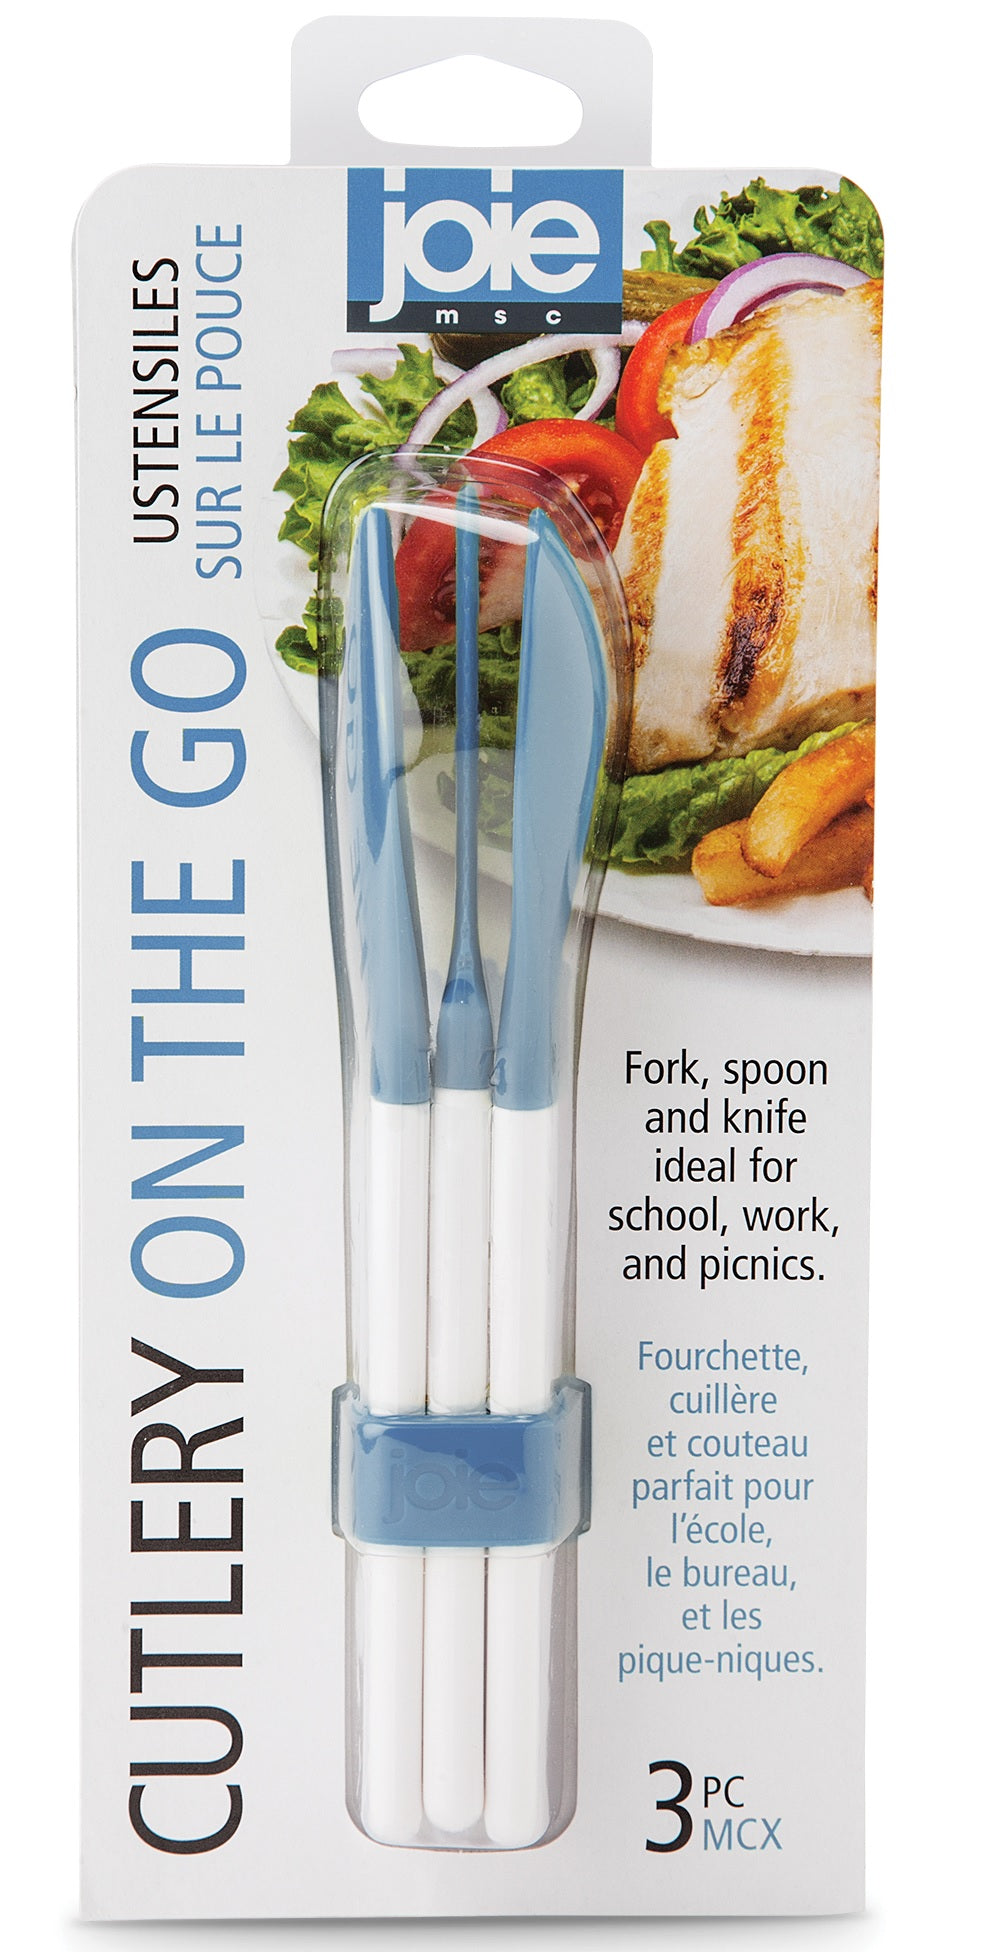 Joie MSC 60020 Cutlery On The Go, Assorted Colors